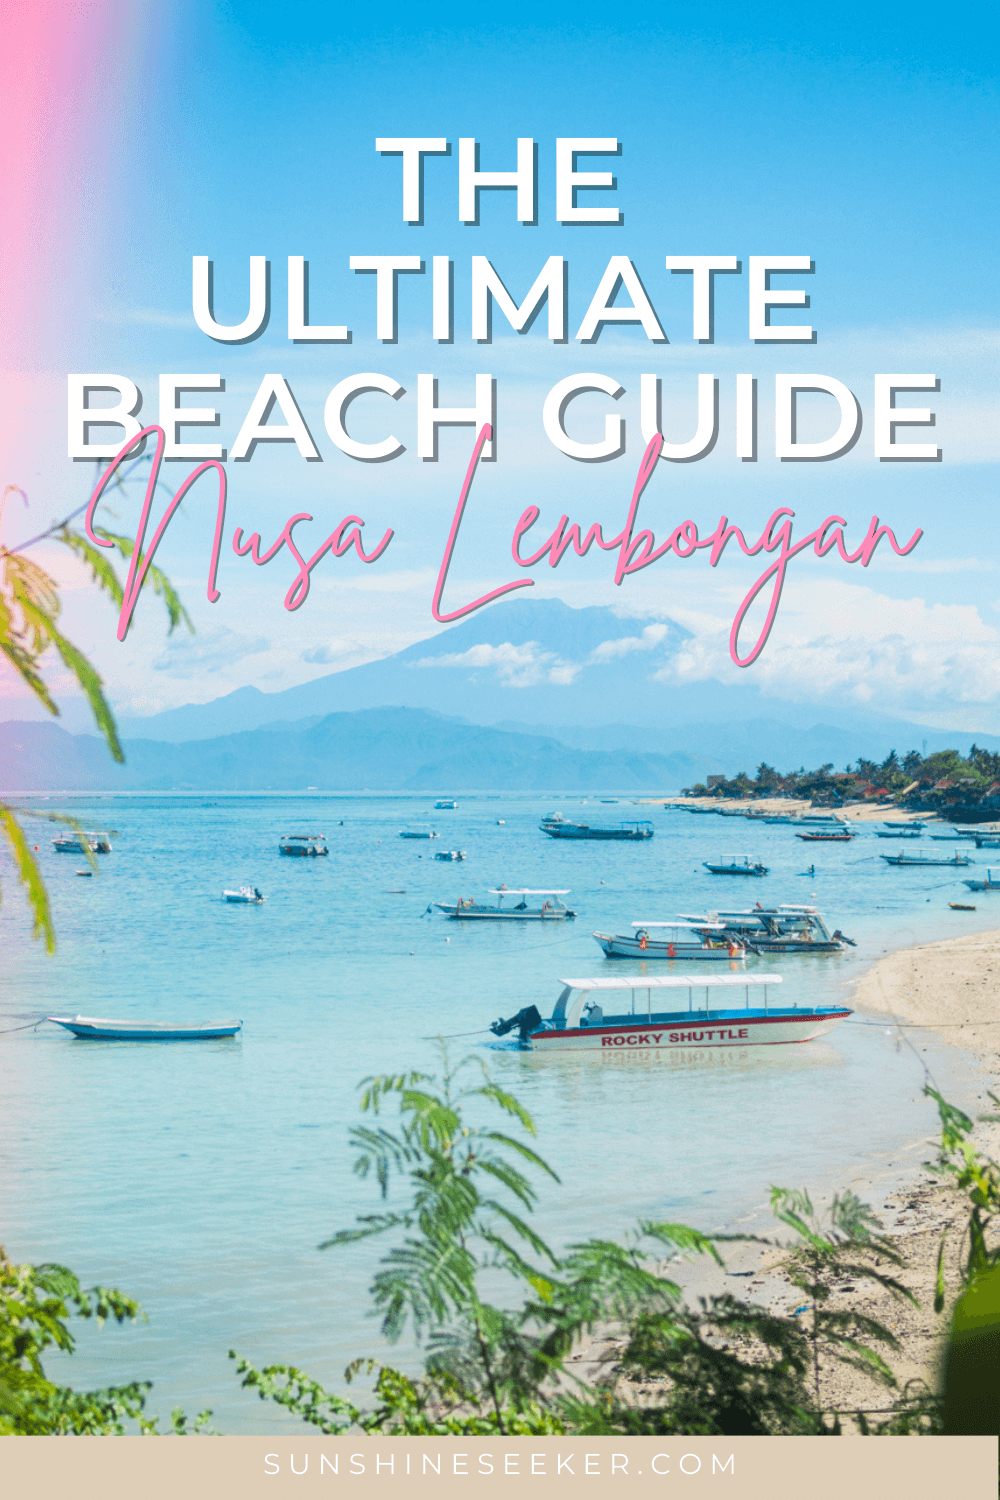 A Nusa Lembongan beach guide - Don't miss out on these stunning beaches just 30 minutes off the coast of Bali. Discover the 9 best beach son the island + where to stay close to the beach on Nusa Lembongan, one of my favorite islands in Indonesia.